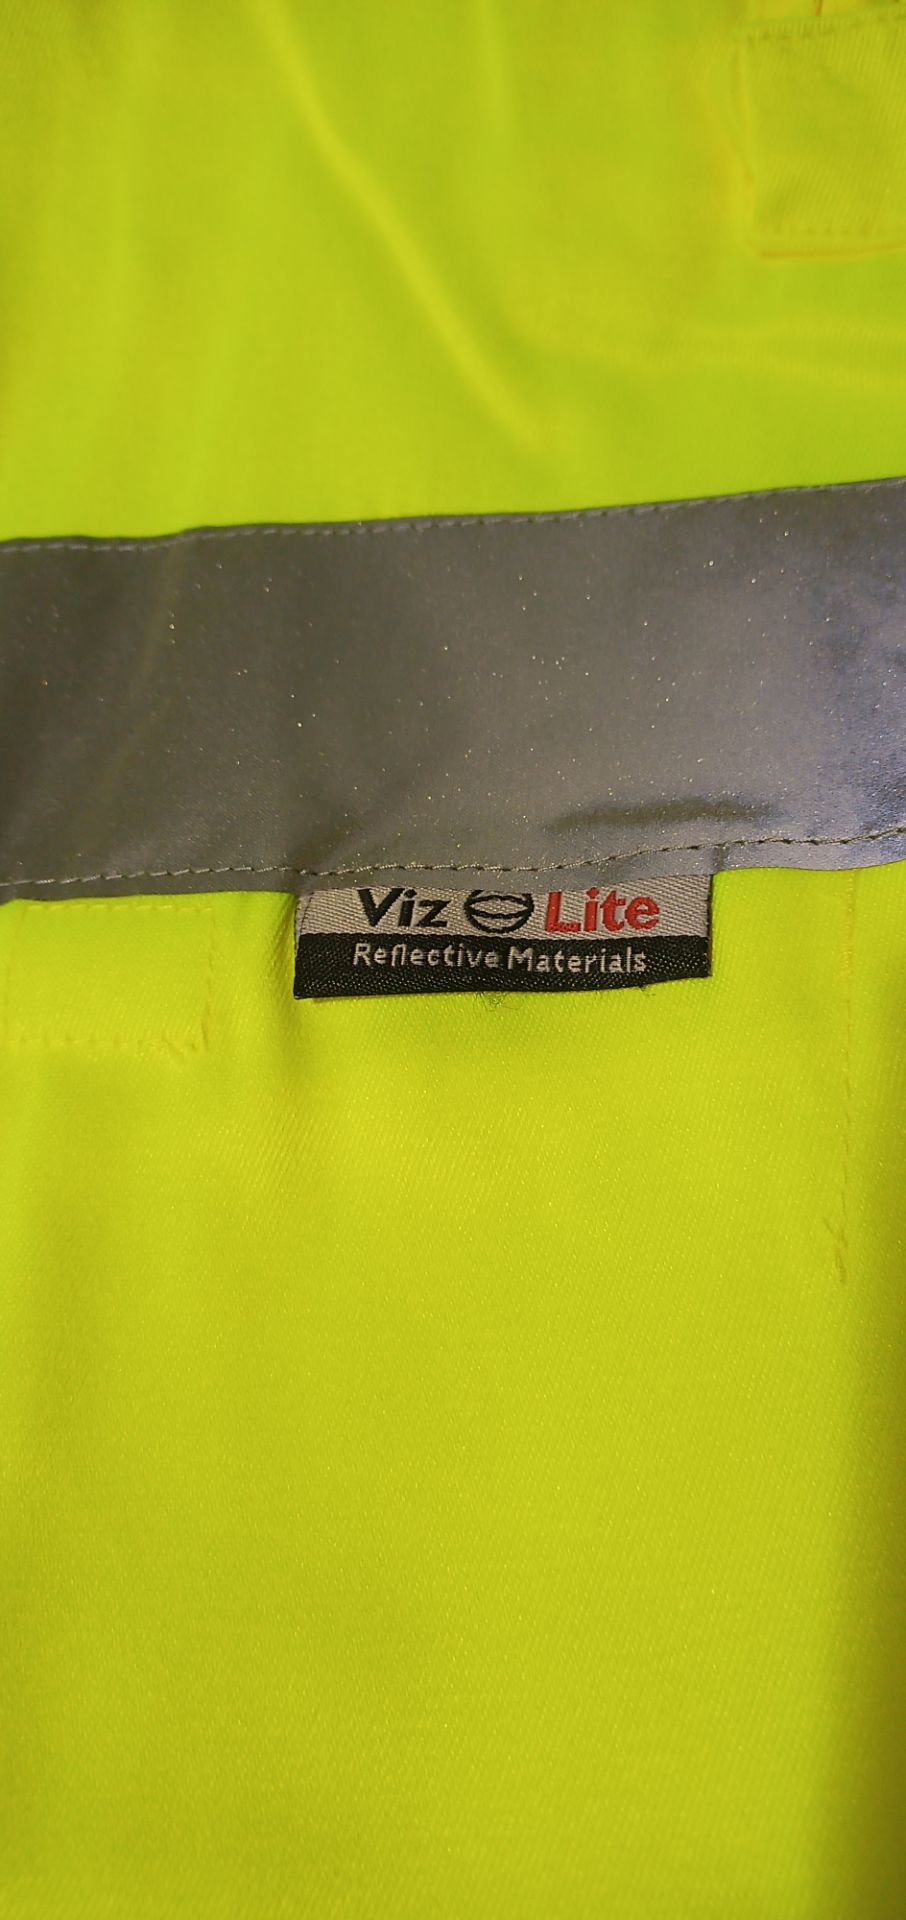 25x BRAND NEW SEALED CARTONS, SIZE 2XL CARGO TROUSERS ARE VIZWEAR BRAND *PLUS VAT* - Image 5 of 8